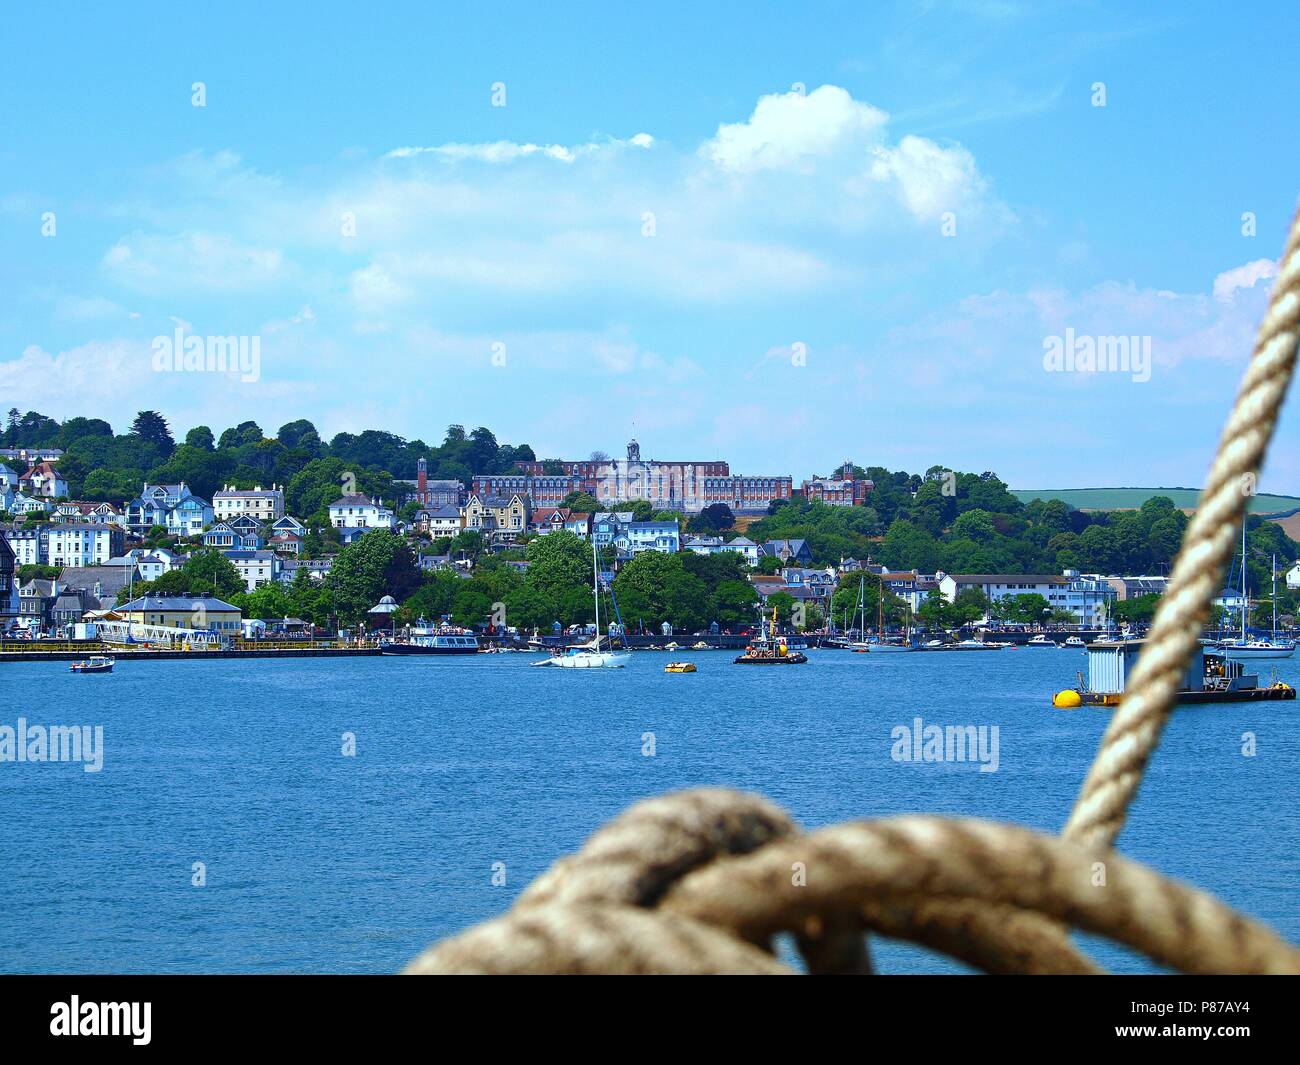 Brixham Breakwater High Resolution Stock Photography and Images - Alamy